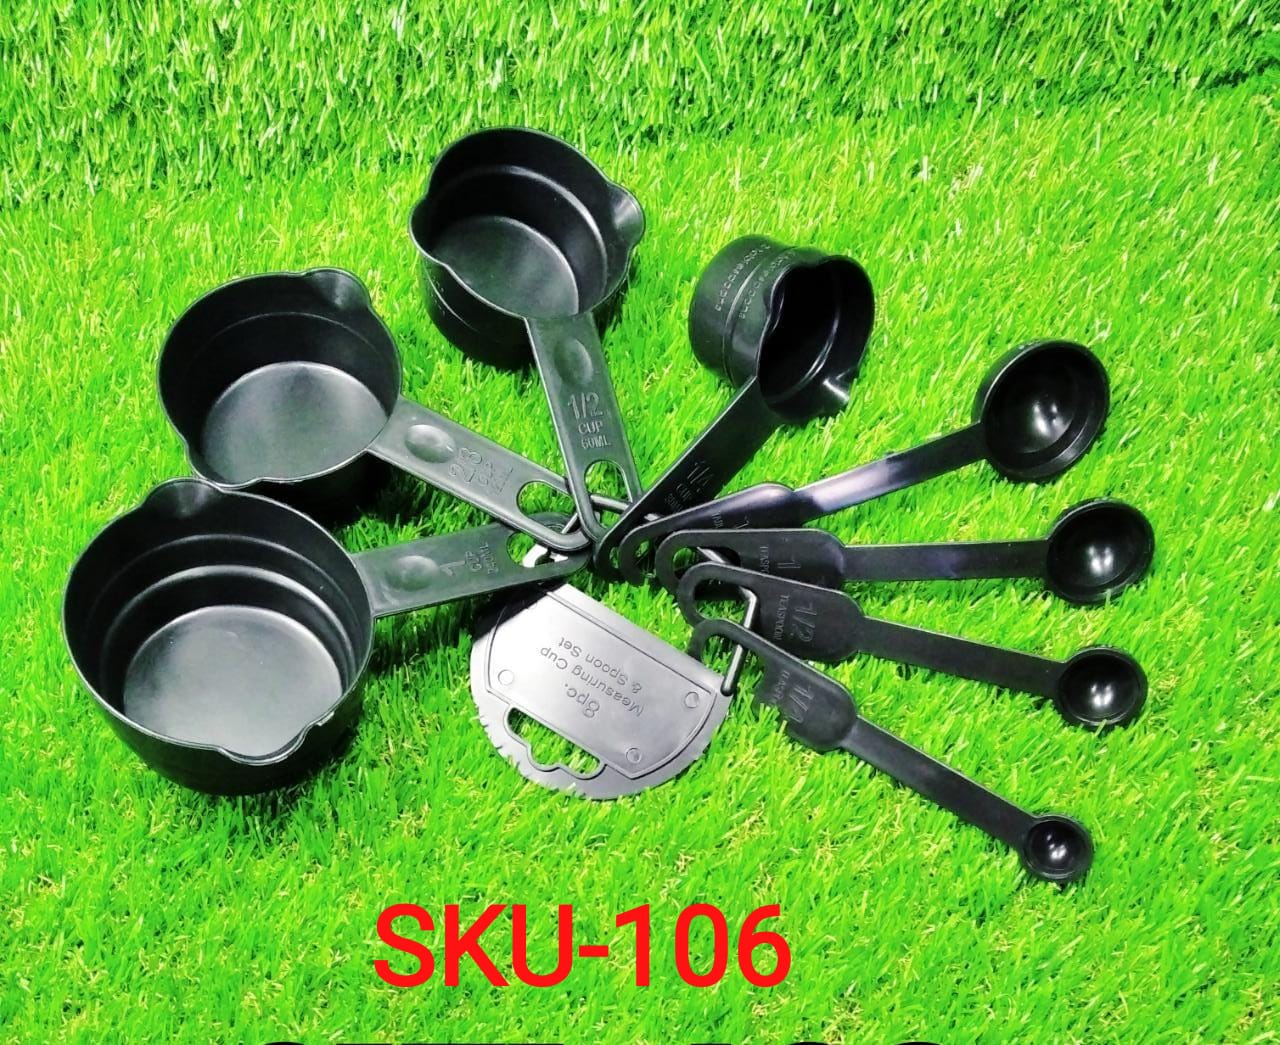 106 Plastic Measuring Cups and Spoons (8 Pcs, Black) Go5 Incorporation